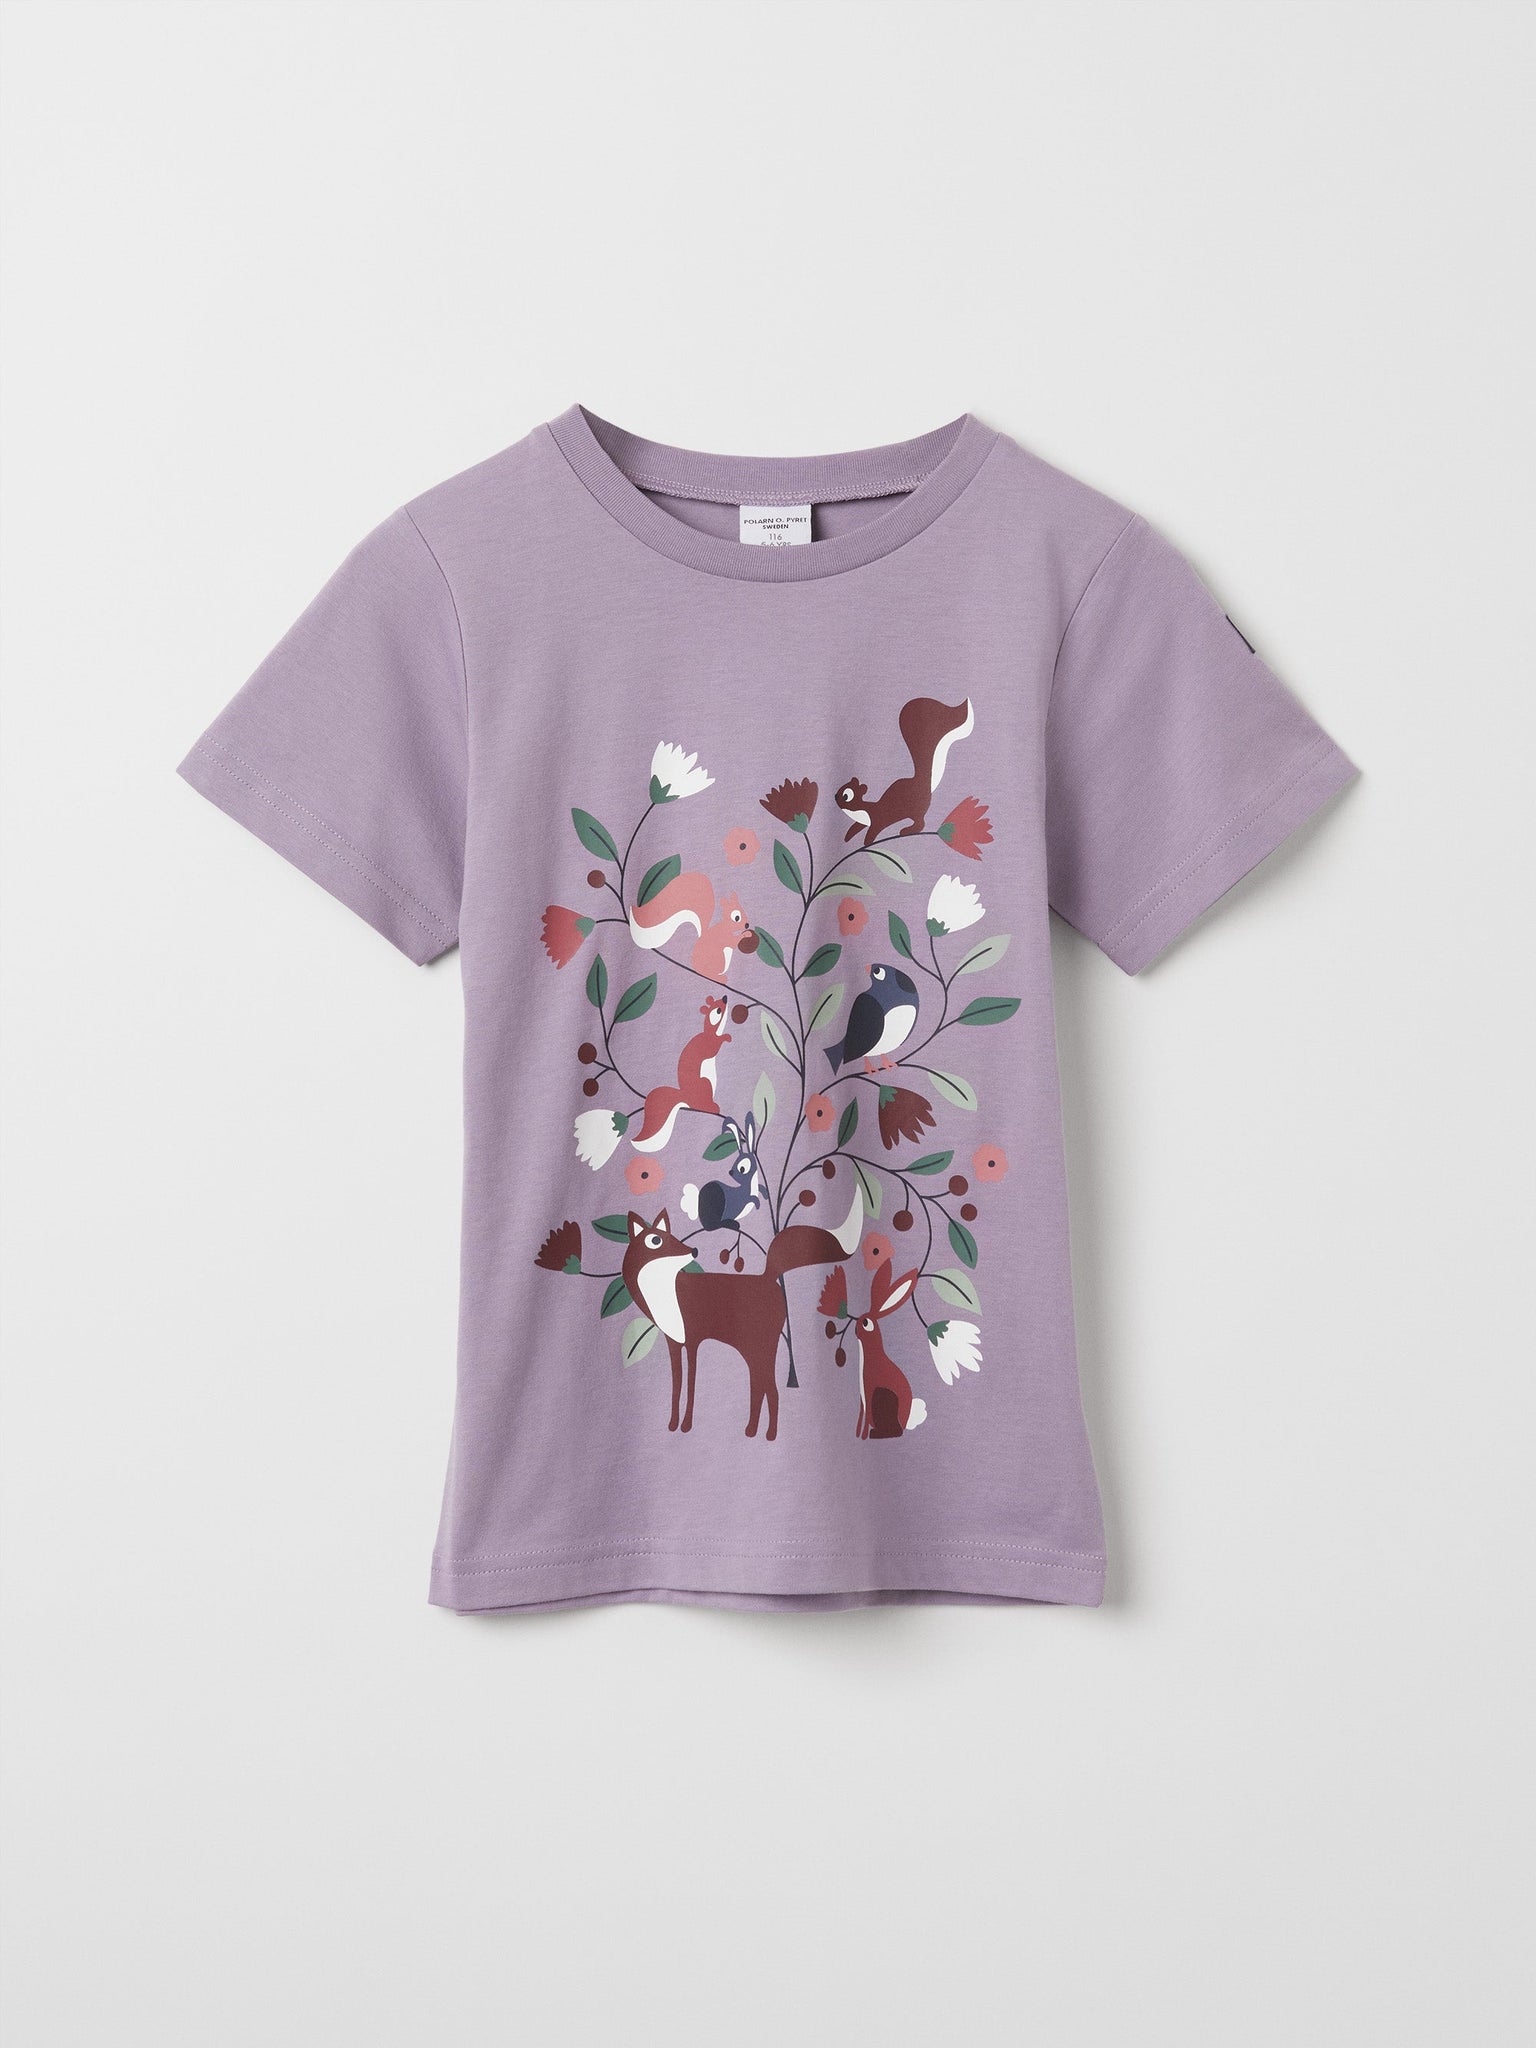 Cotton Kids Animal Print T-Shirt from the Polarn O. Pyret kidswear collection. Nordic kids clothes made from sustainable sources.